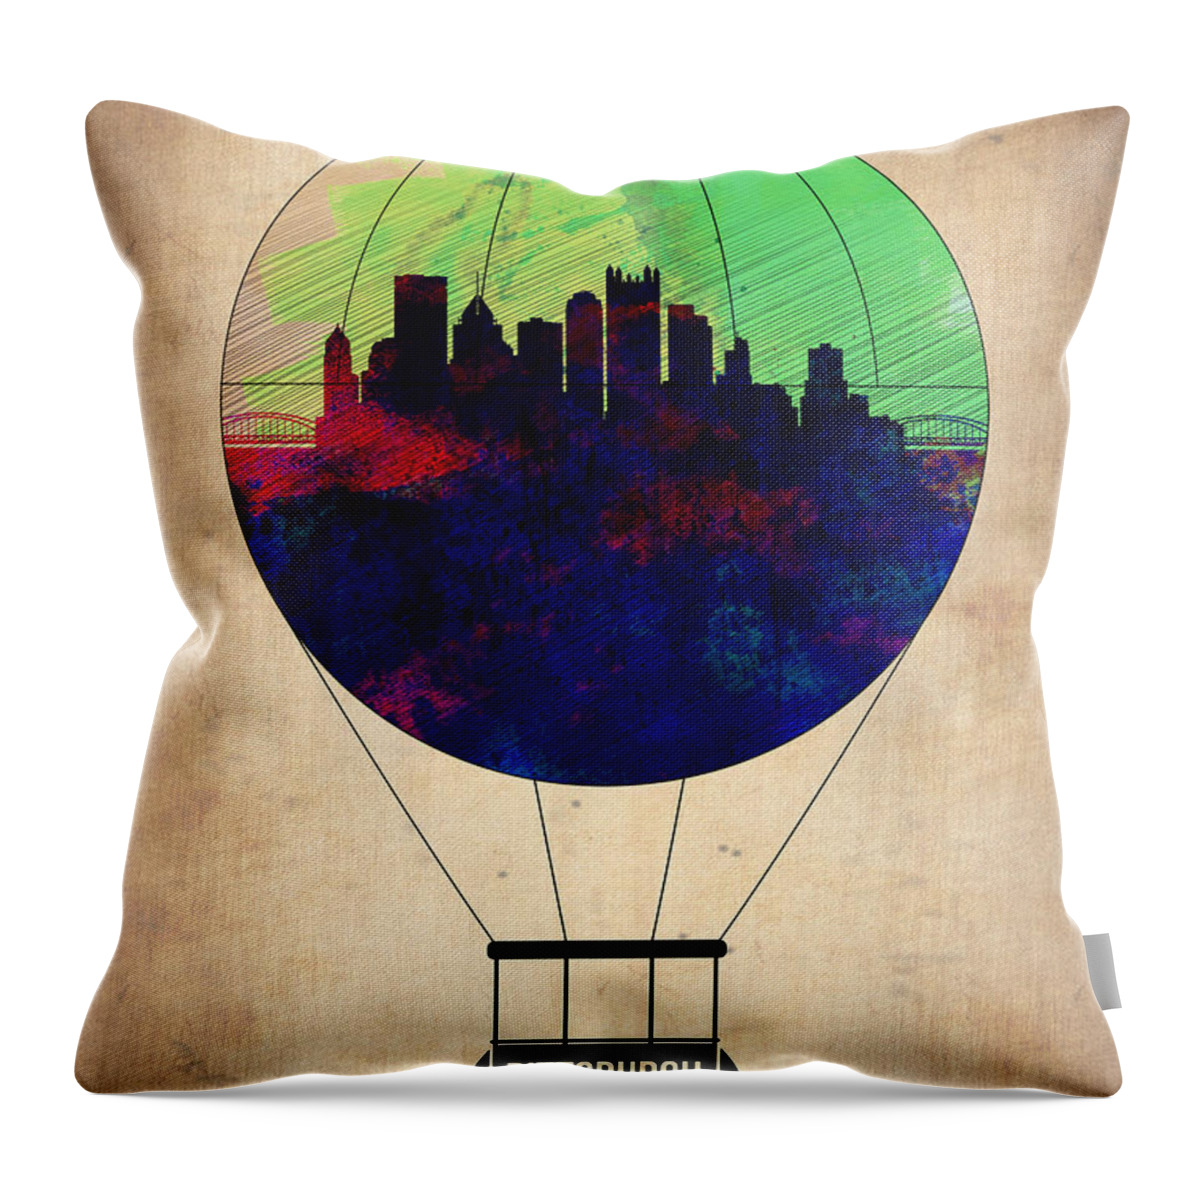 Pittsburgh Throw Pillow featuring the painting Pittsburgh Air Balloon by Naxart Studio